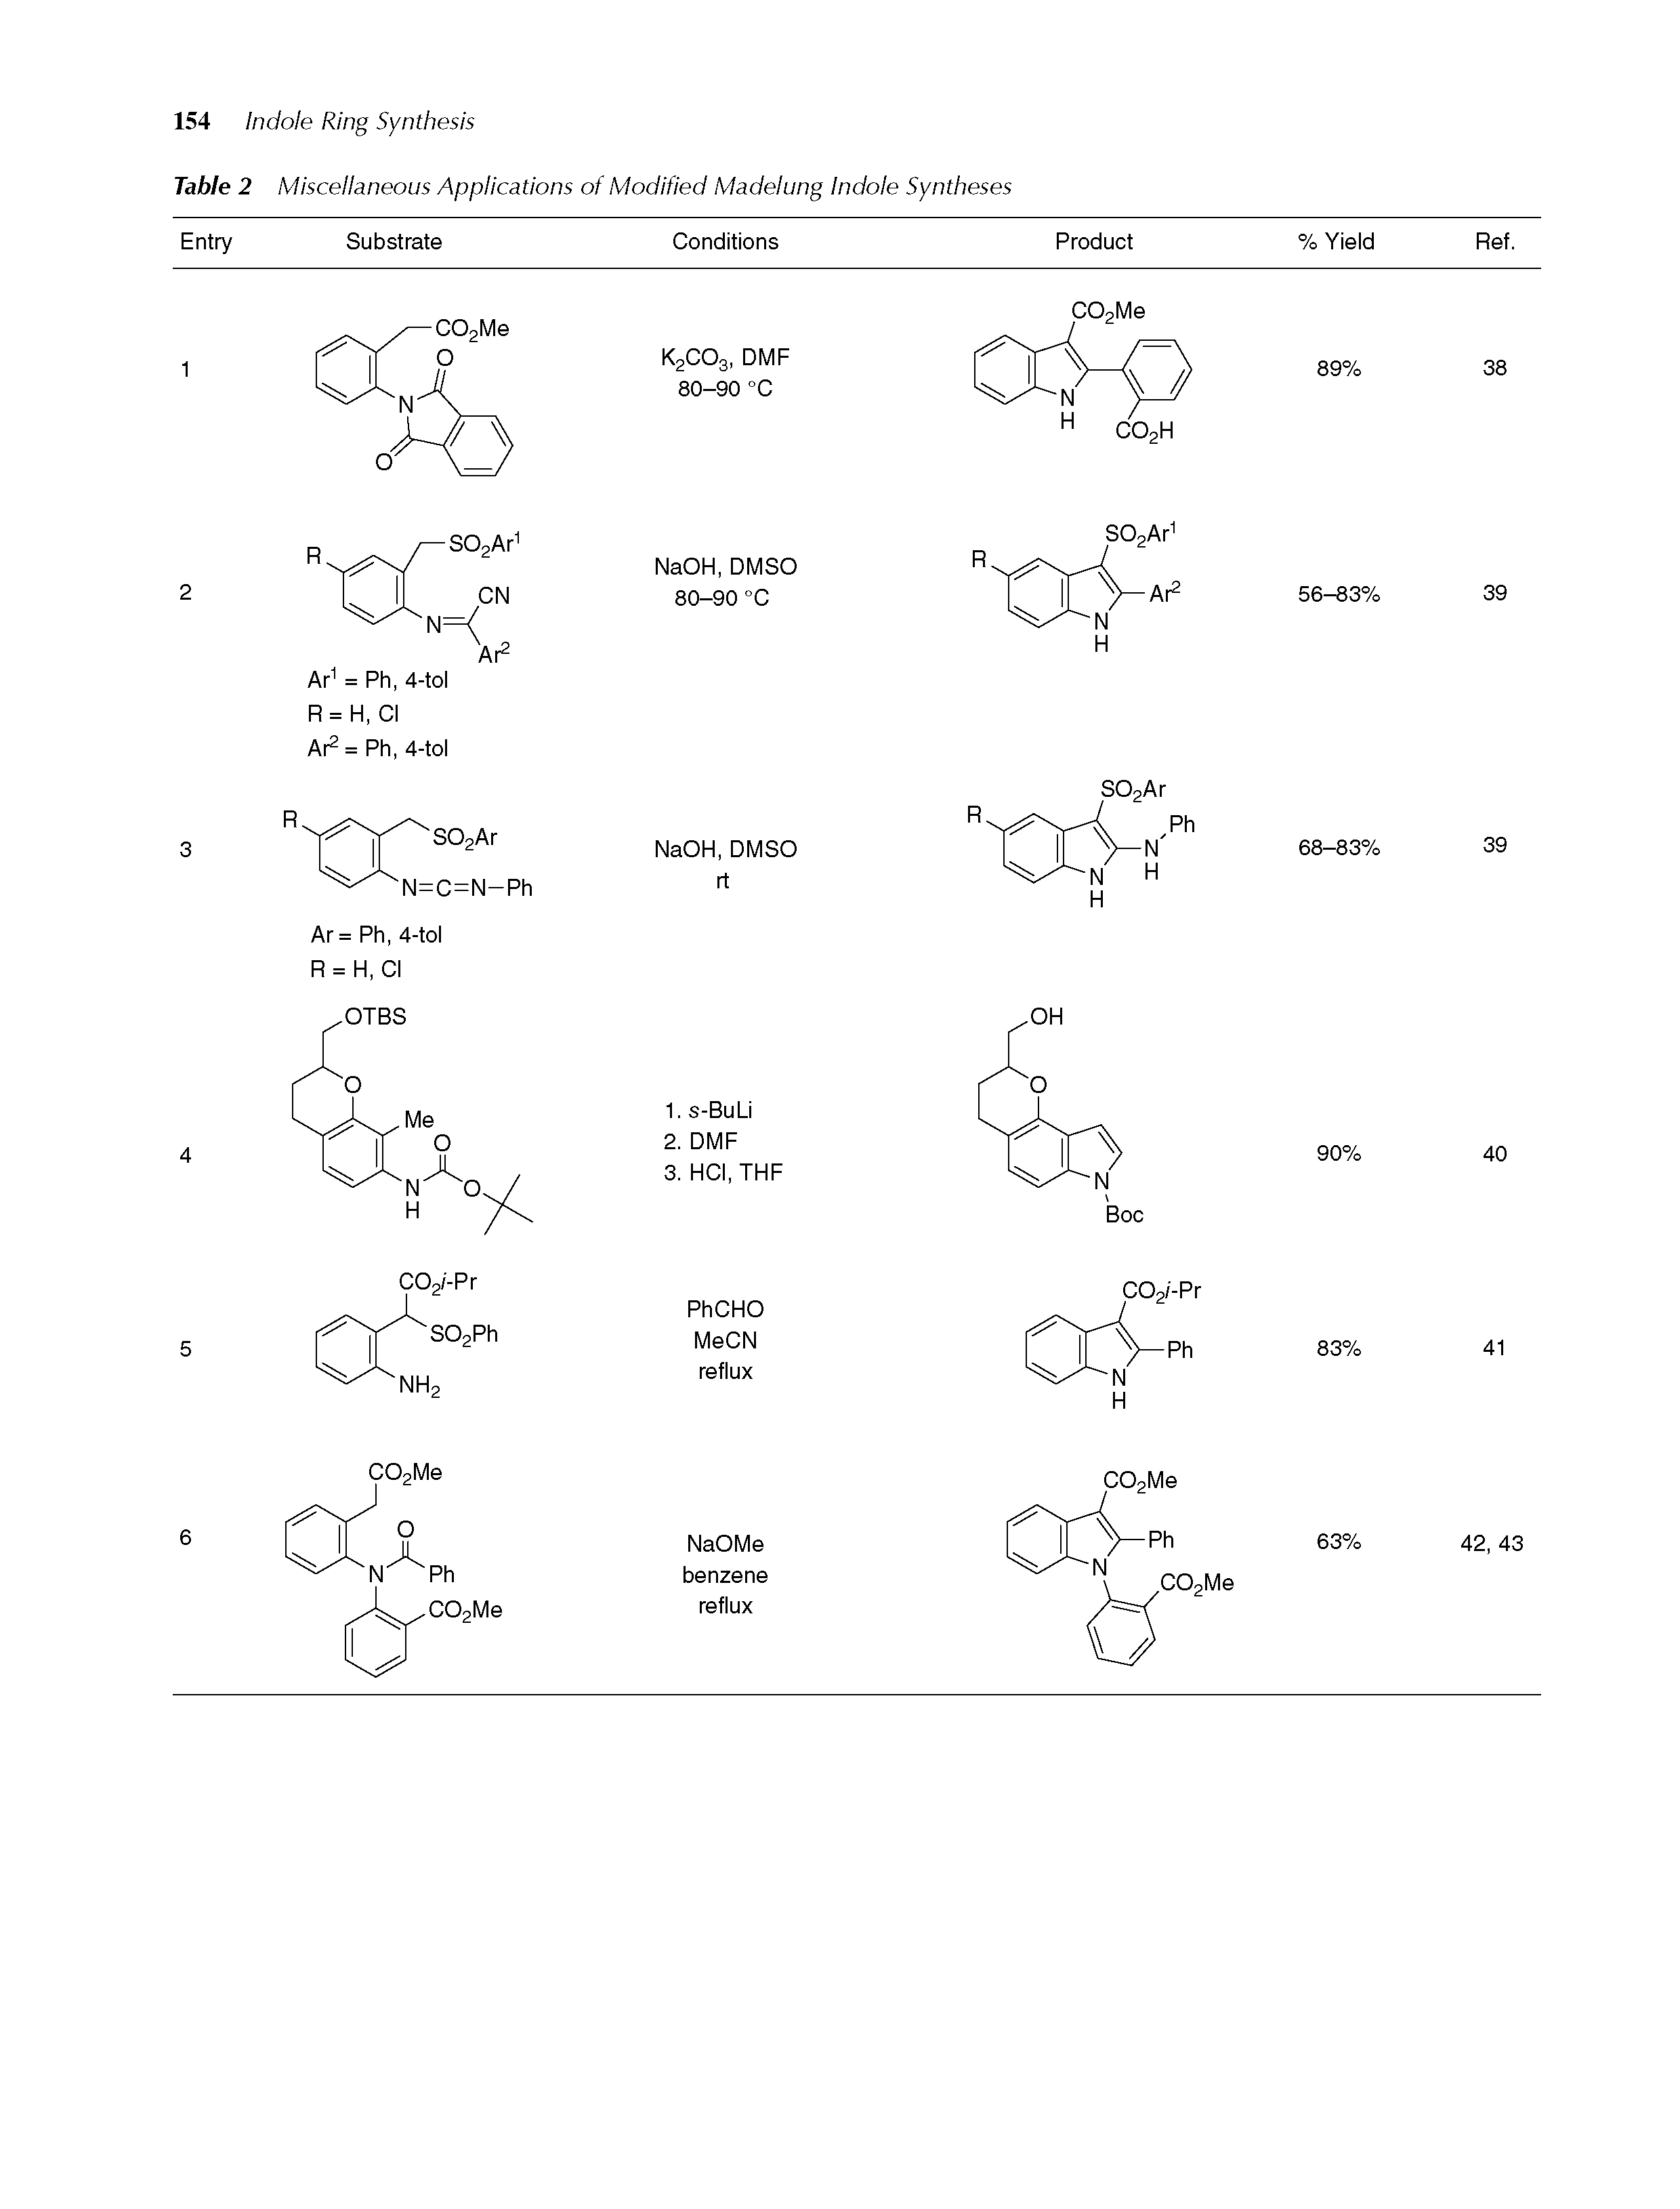 Table 2 Miscellaneous Applications of Modified Madelung Indole Syntheses...